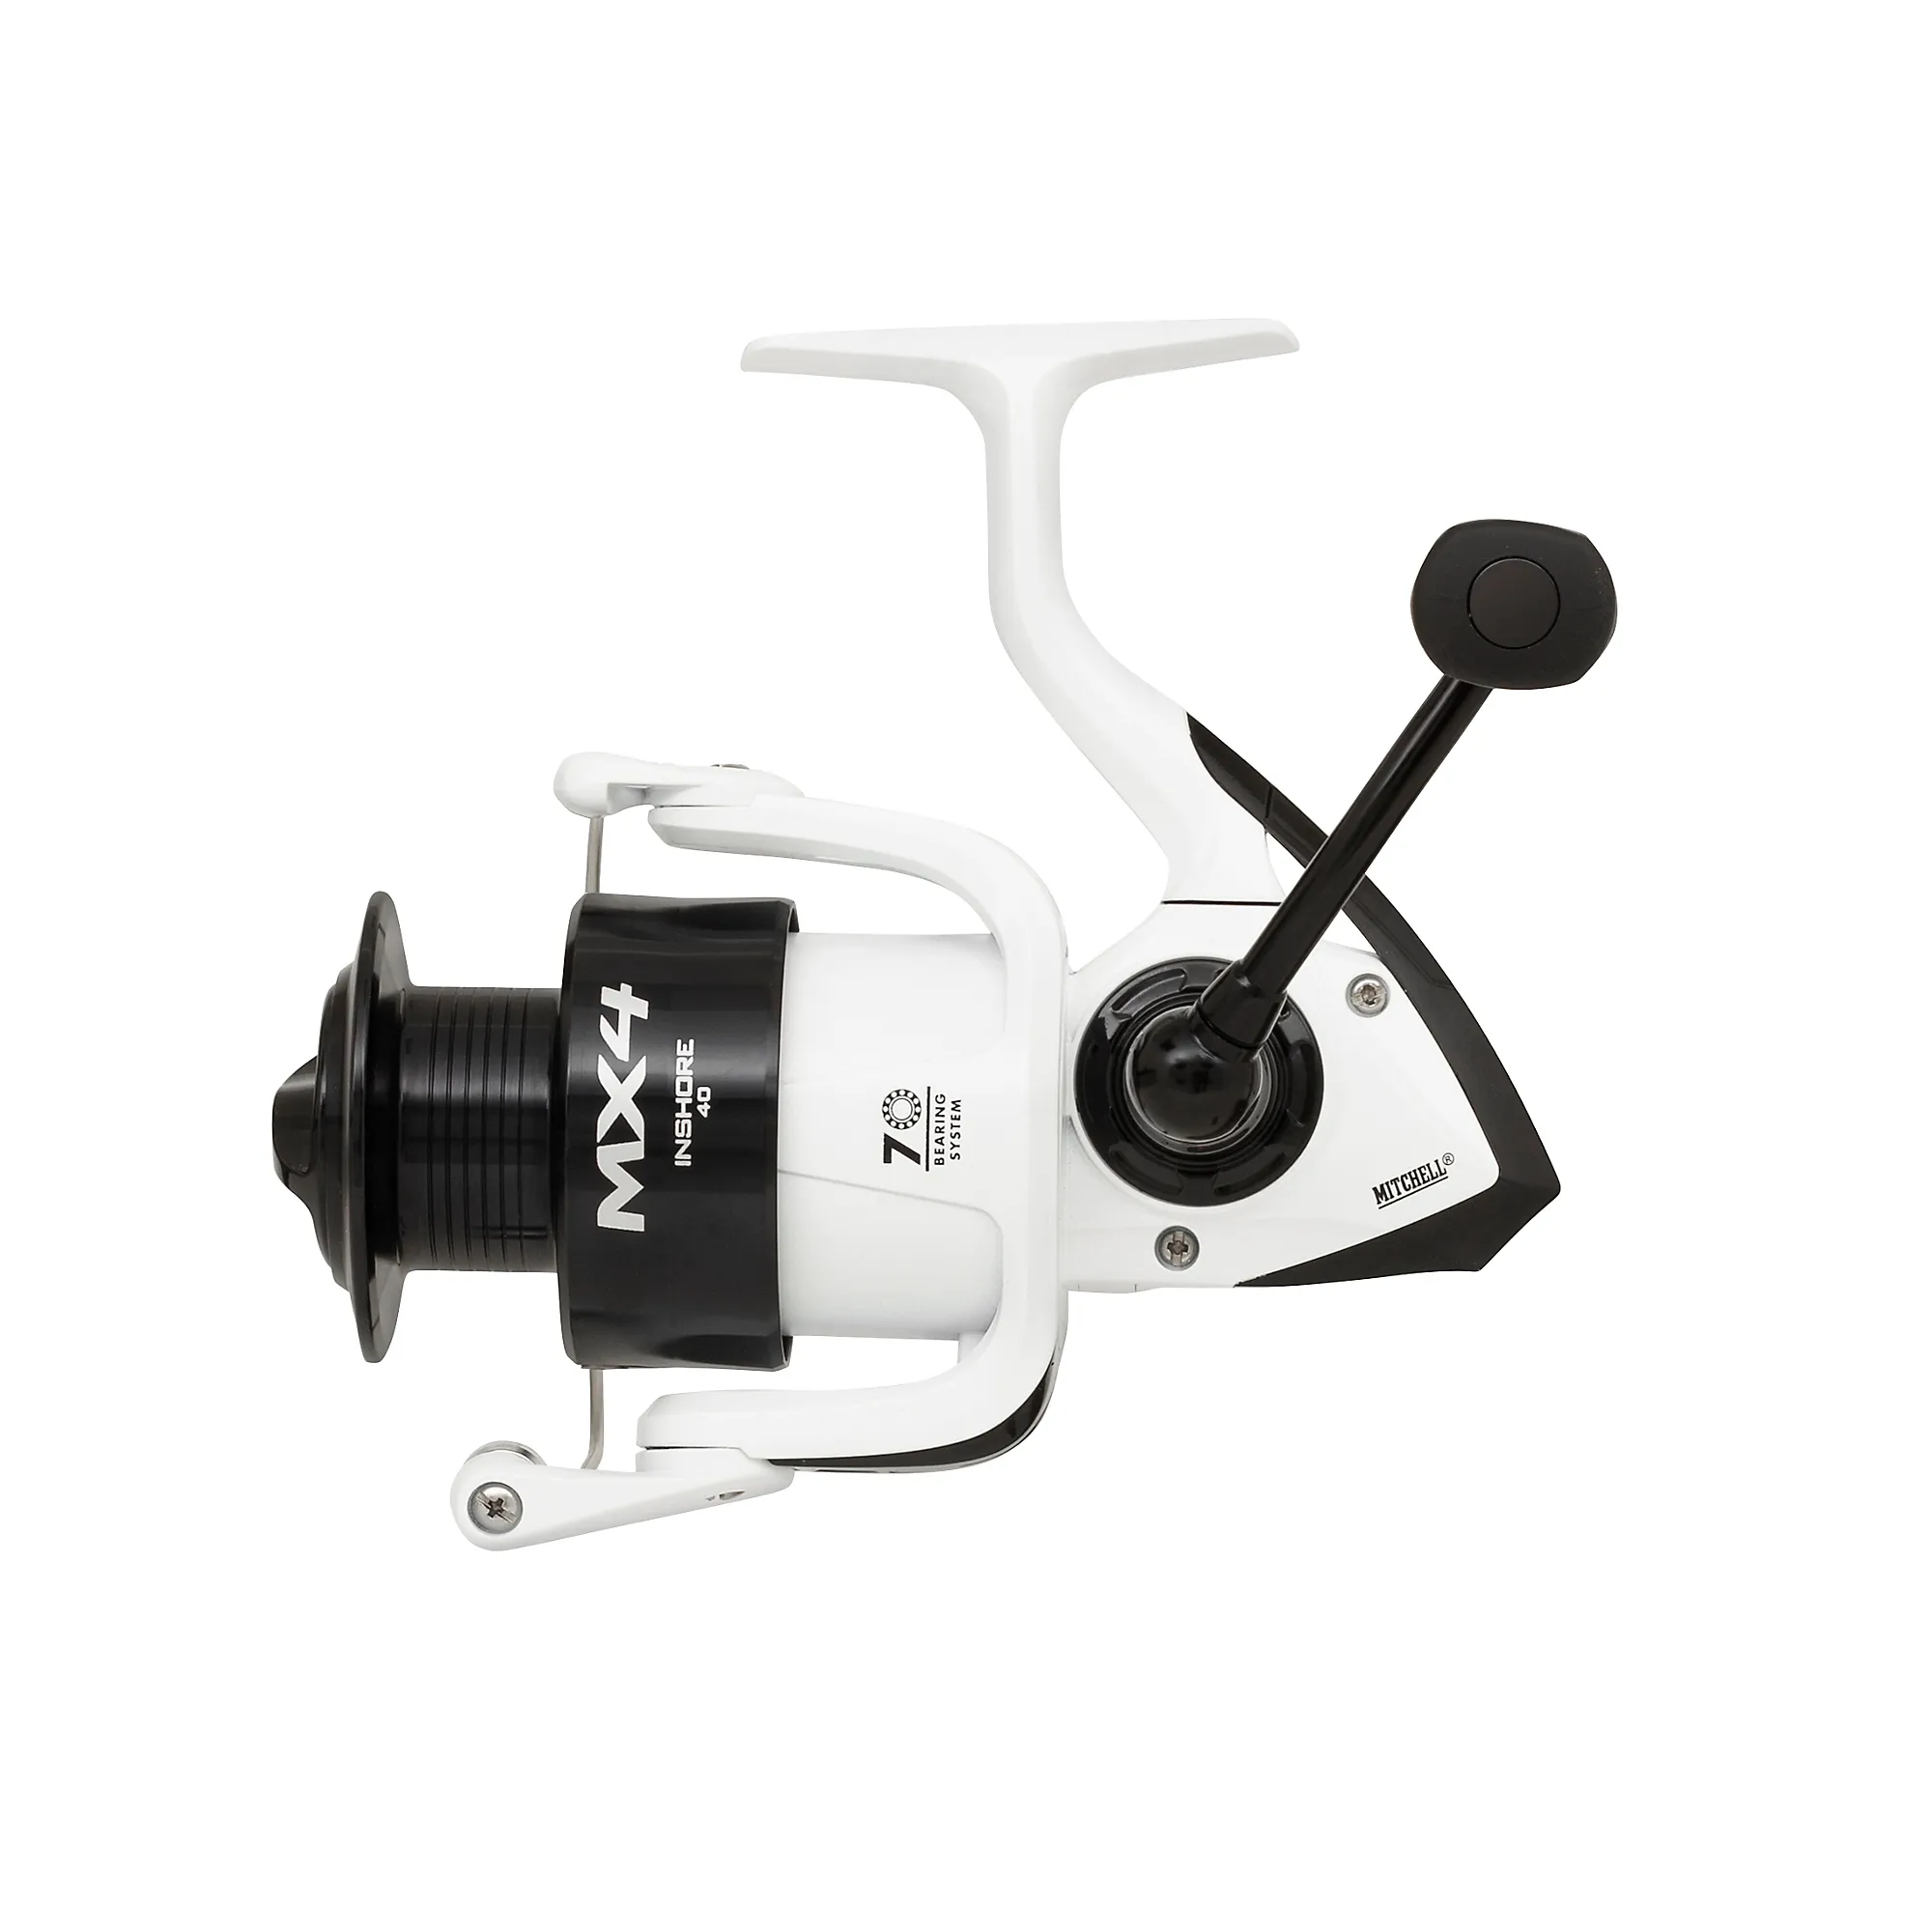 Mitchell MX4 Inshore Spinning Reel